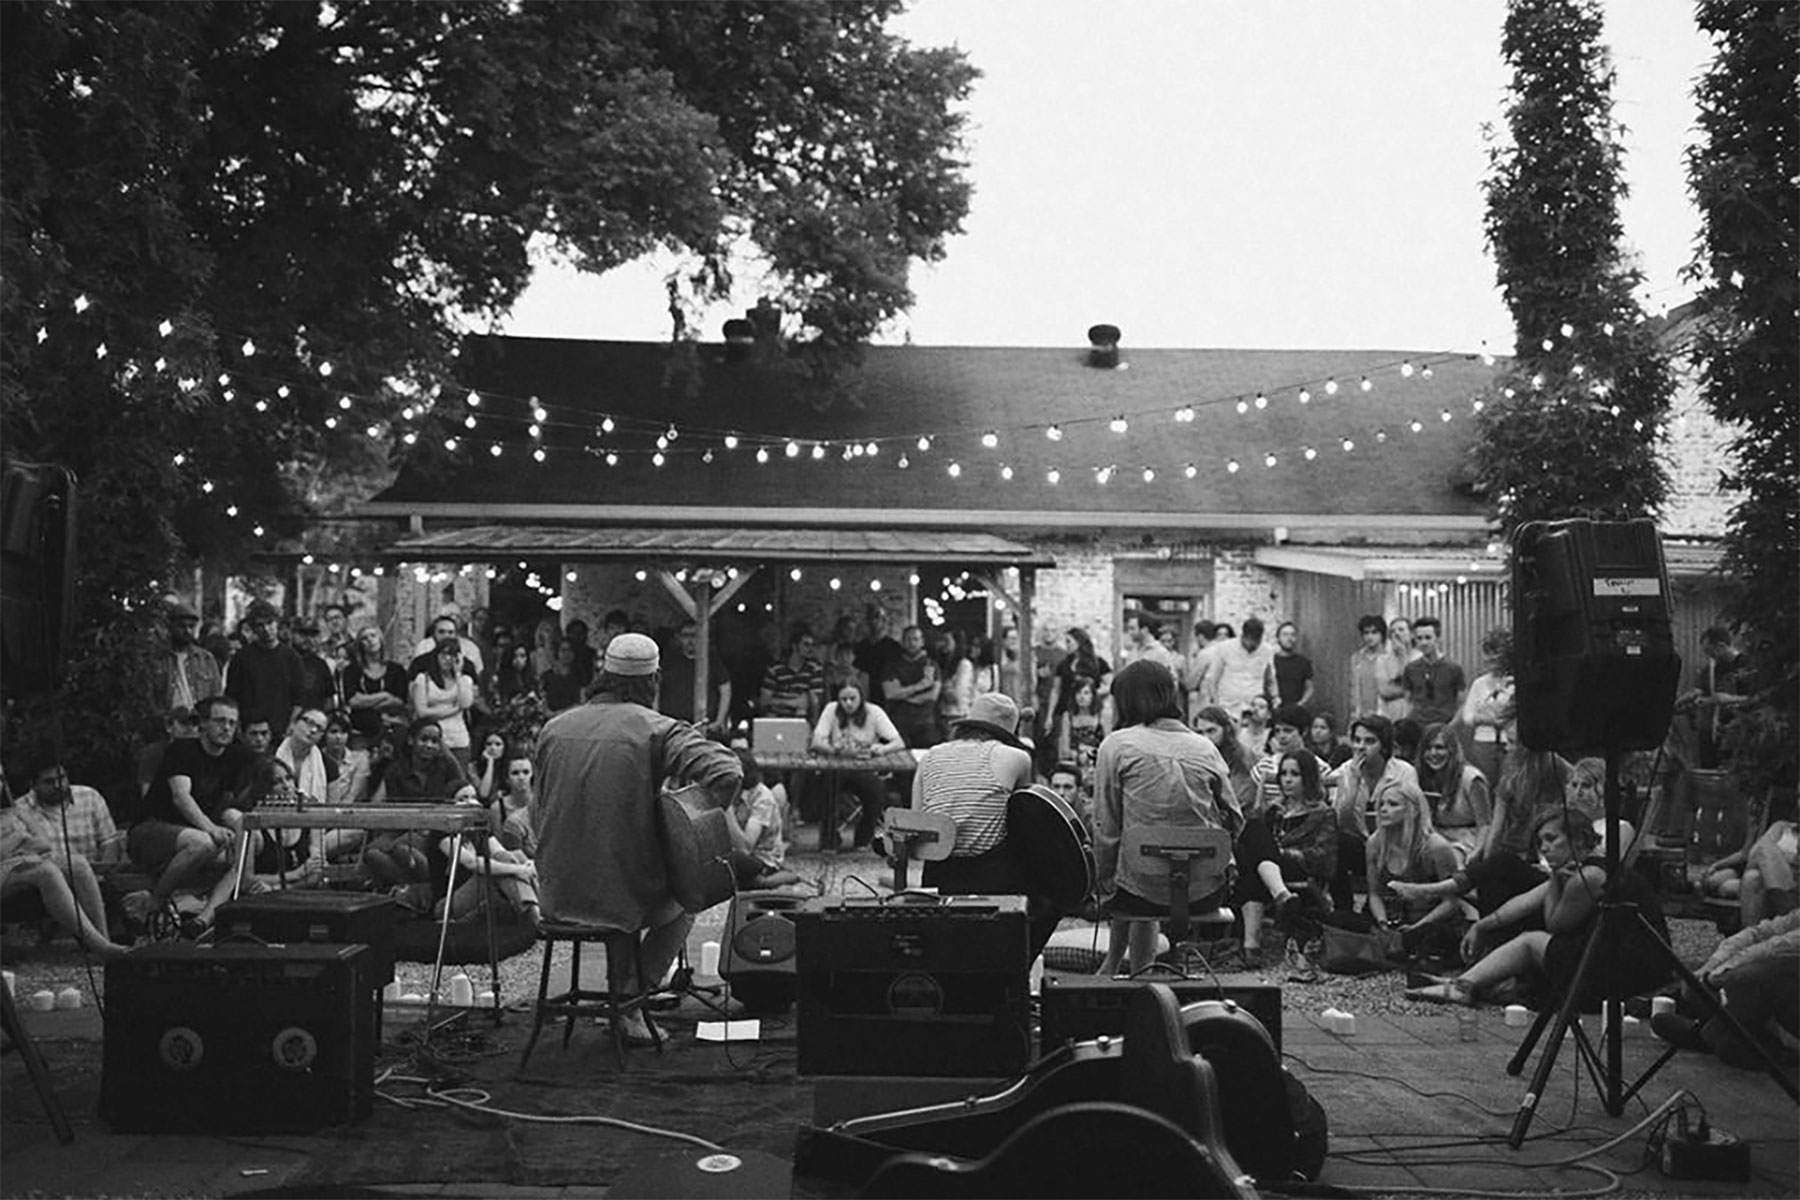 Black and white image of the back of a band sitting casually with their instruments in a backyard. A crowd is watching the band play. There is a brick house in the background, large trees to the left and right, and string lights slung from tree to tree across the image.